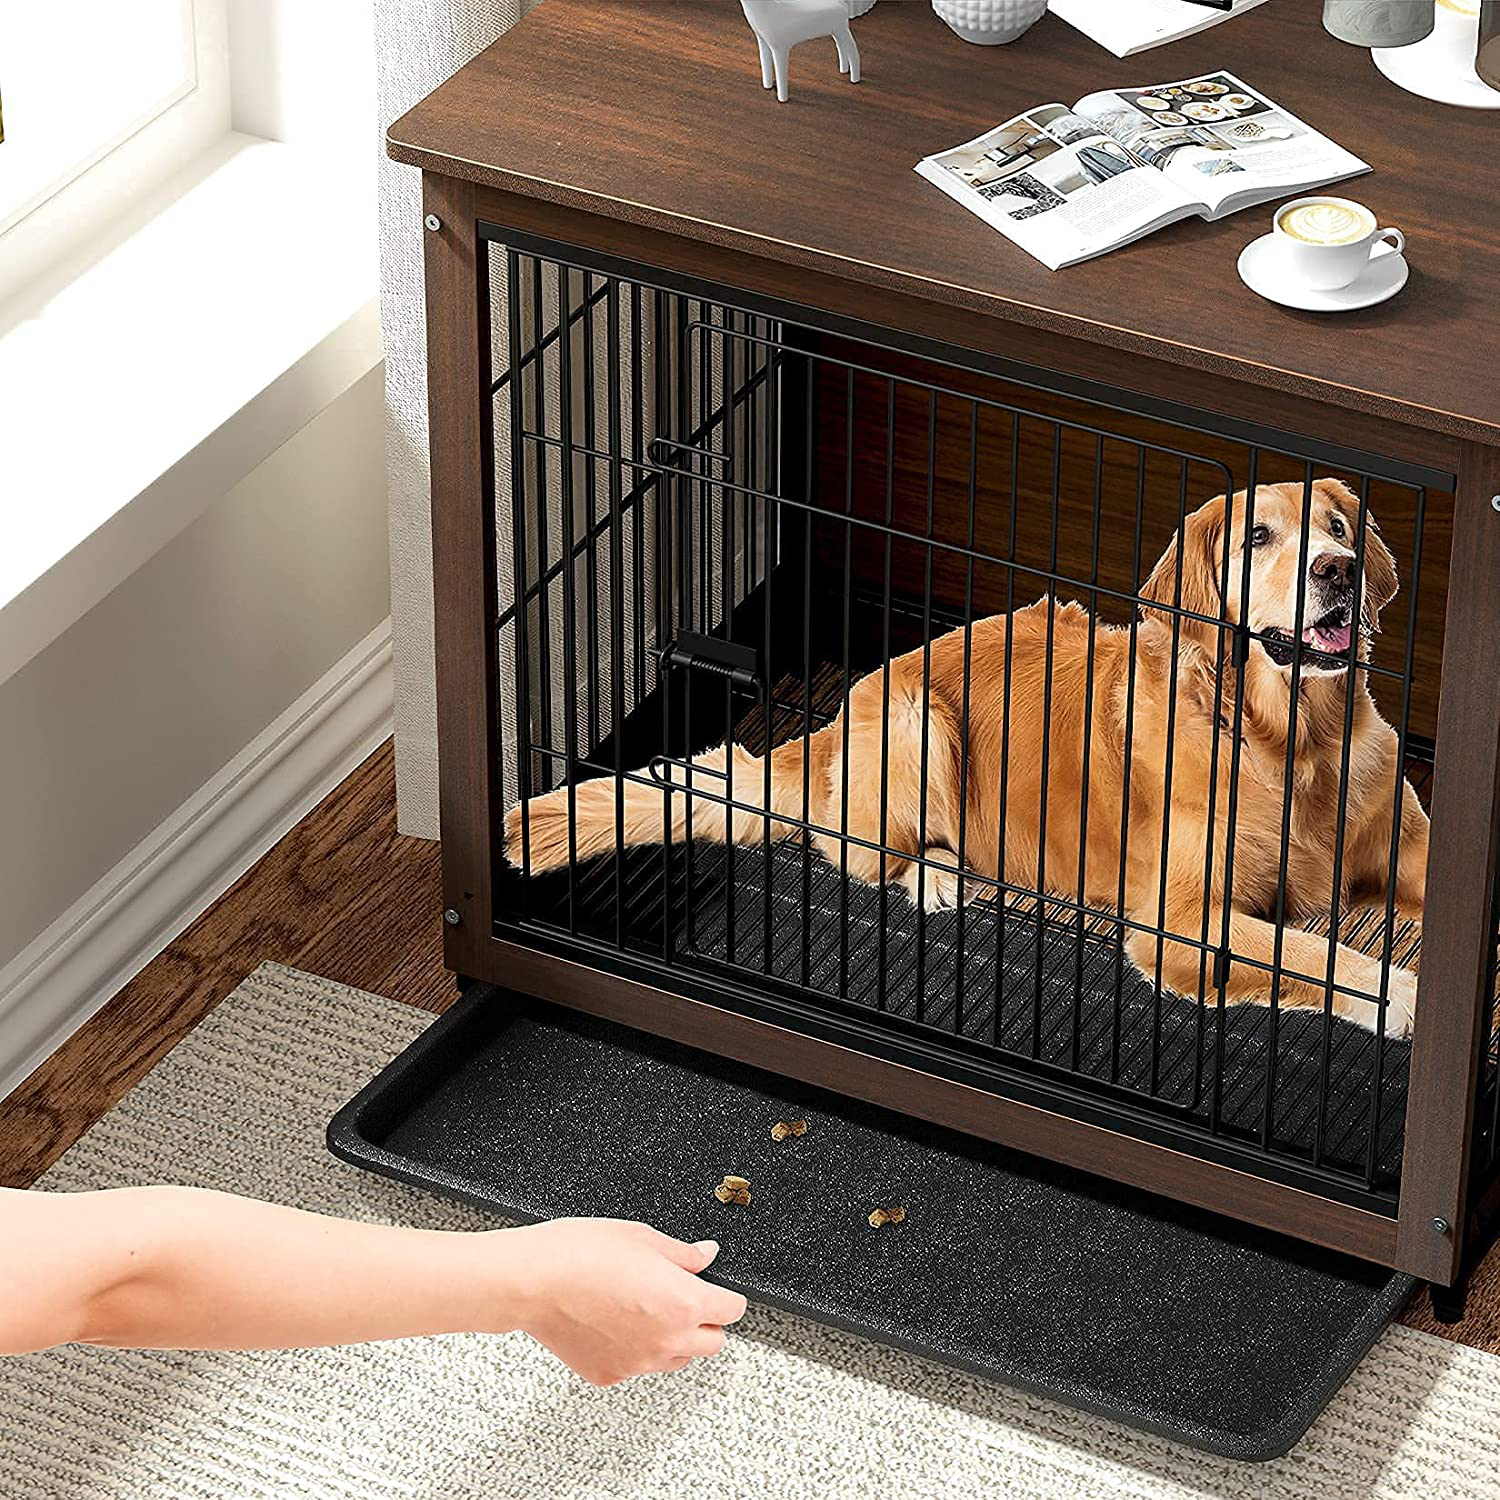 Bingopaw End Table Dog Crate with Double Door,Wooden Pet Kennel with Floor Tray, Top Detachable, Indoor Dog House for Small Medium Dogs